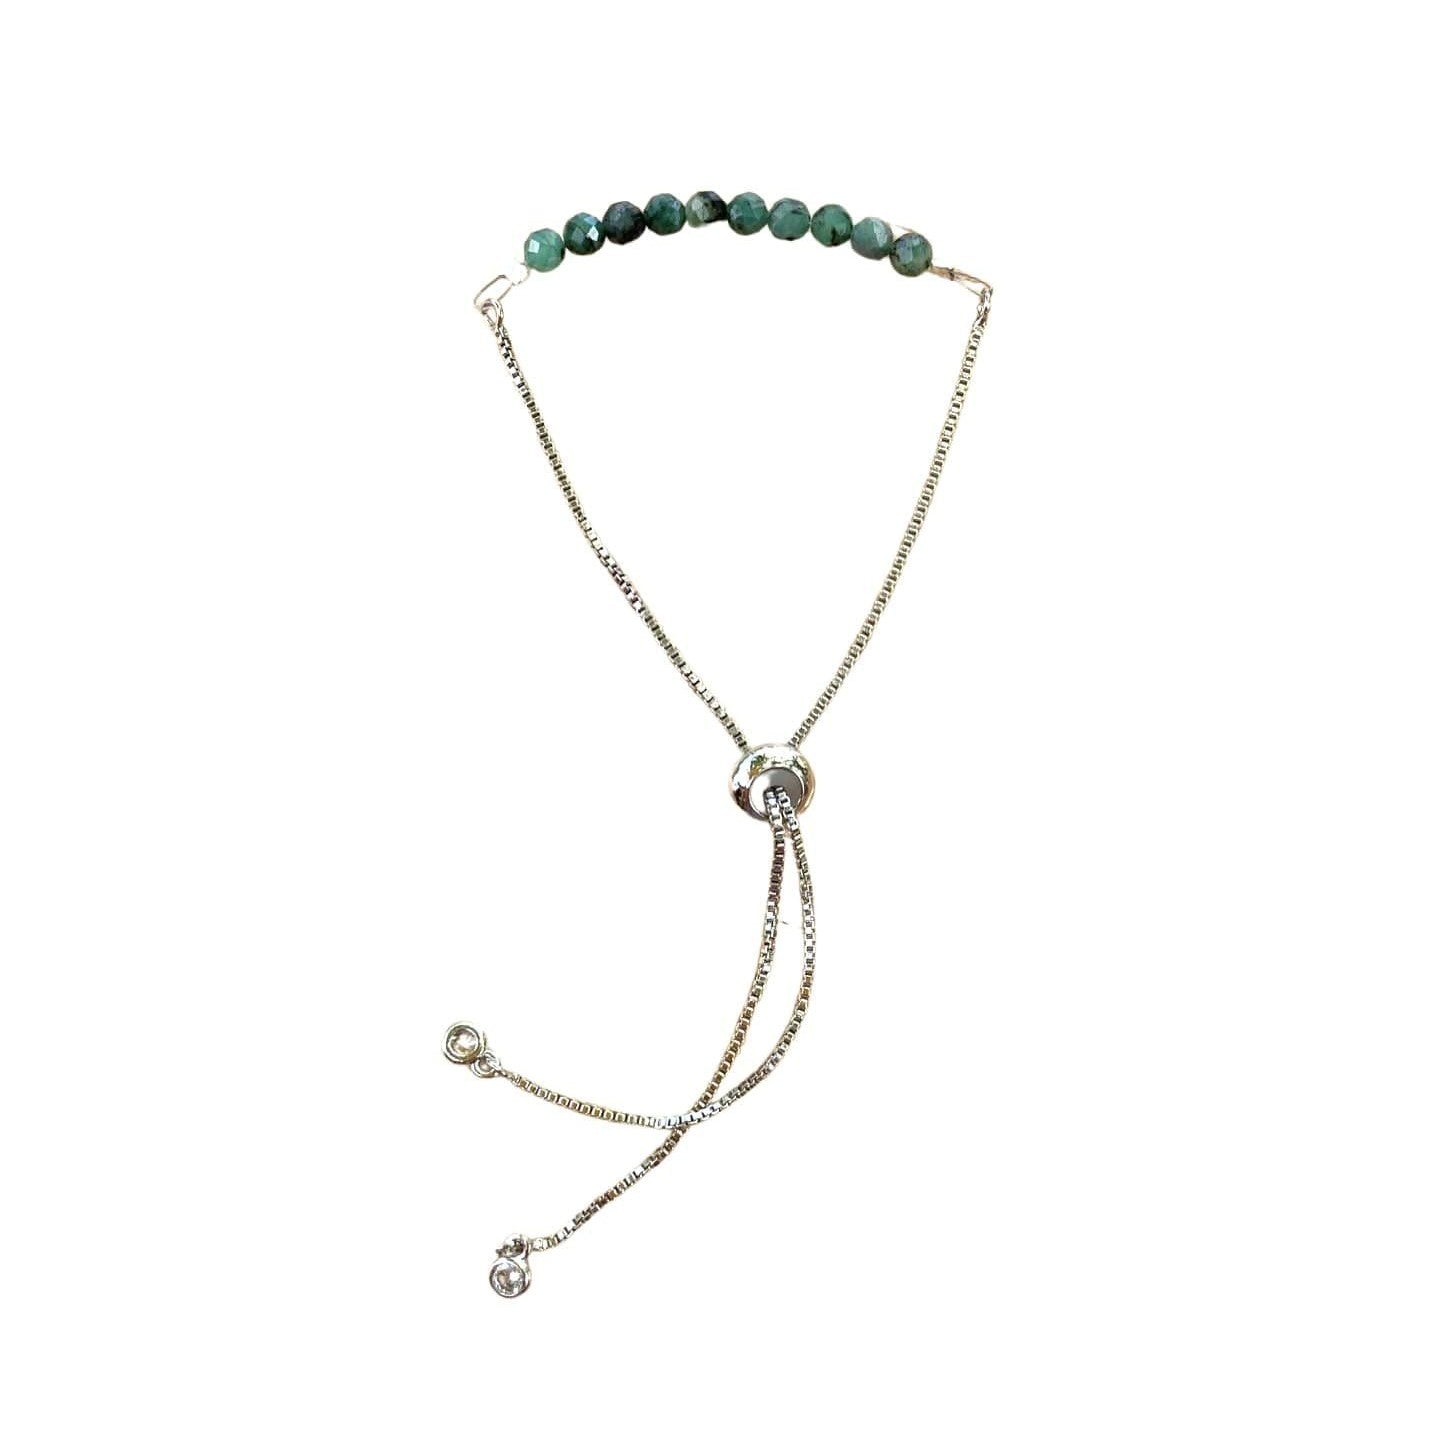 healing crystal bracelets dainty 4mm emeralds with adjustable chain